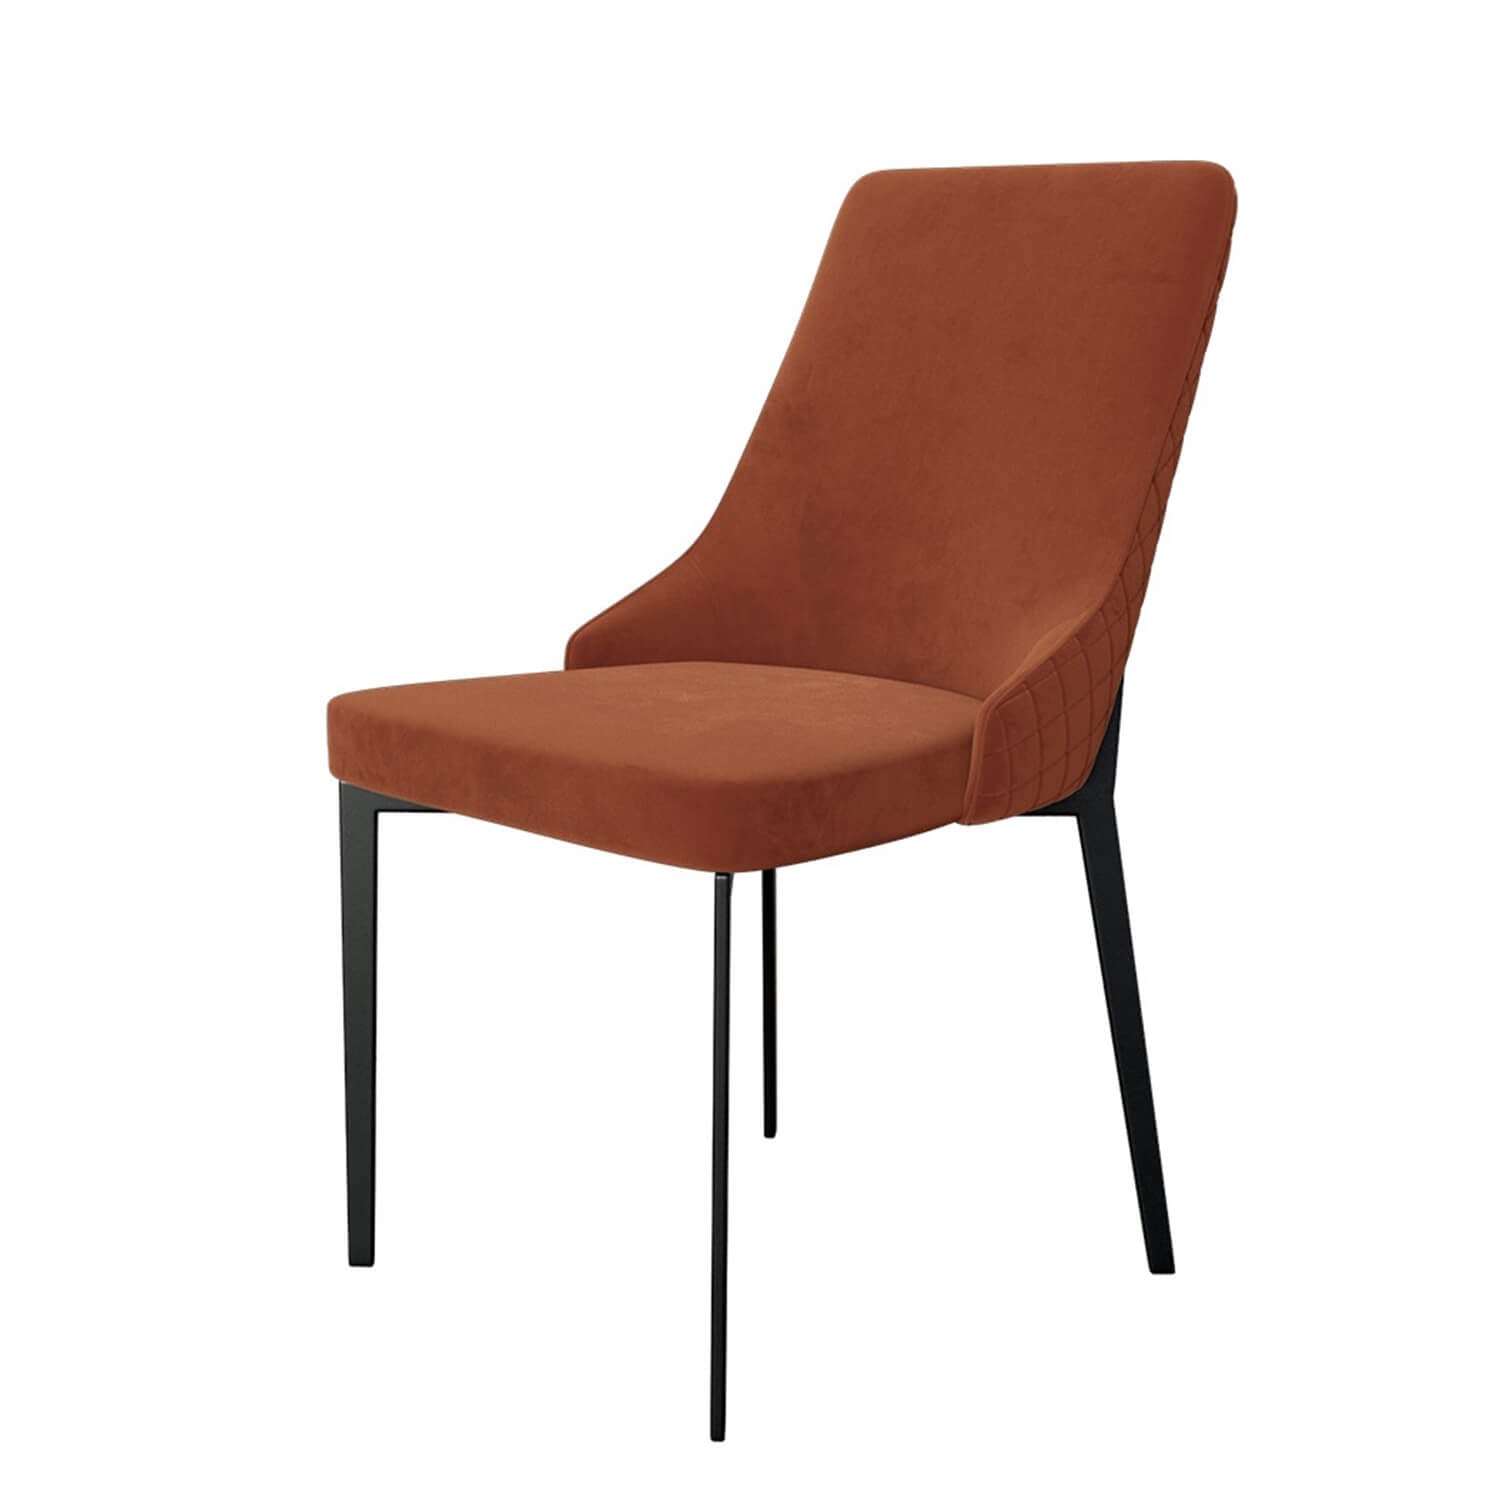 Guidonia dining chair